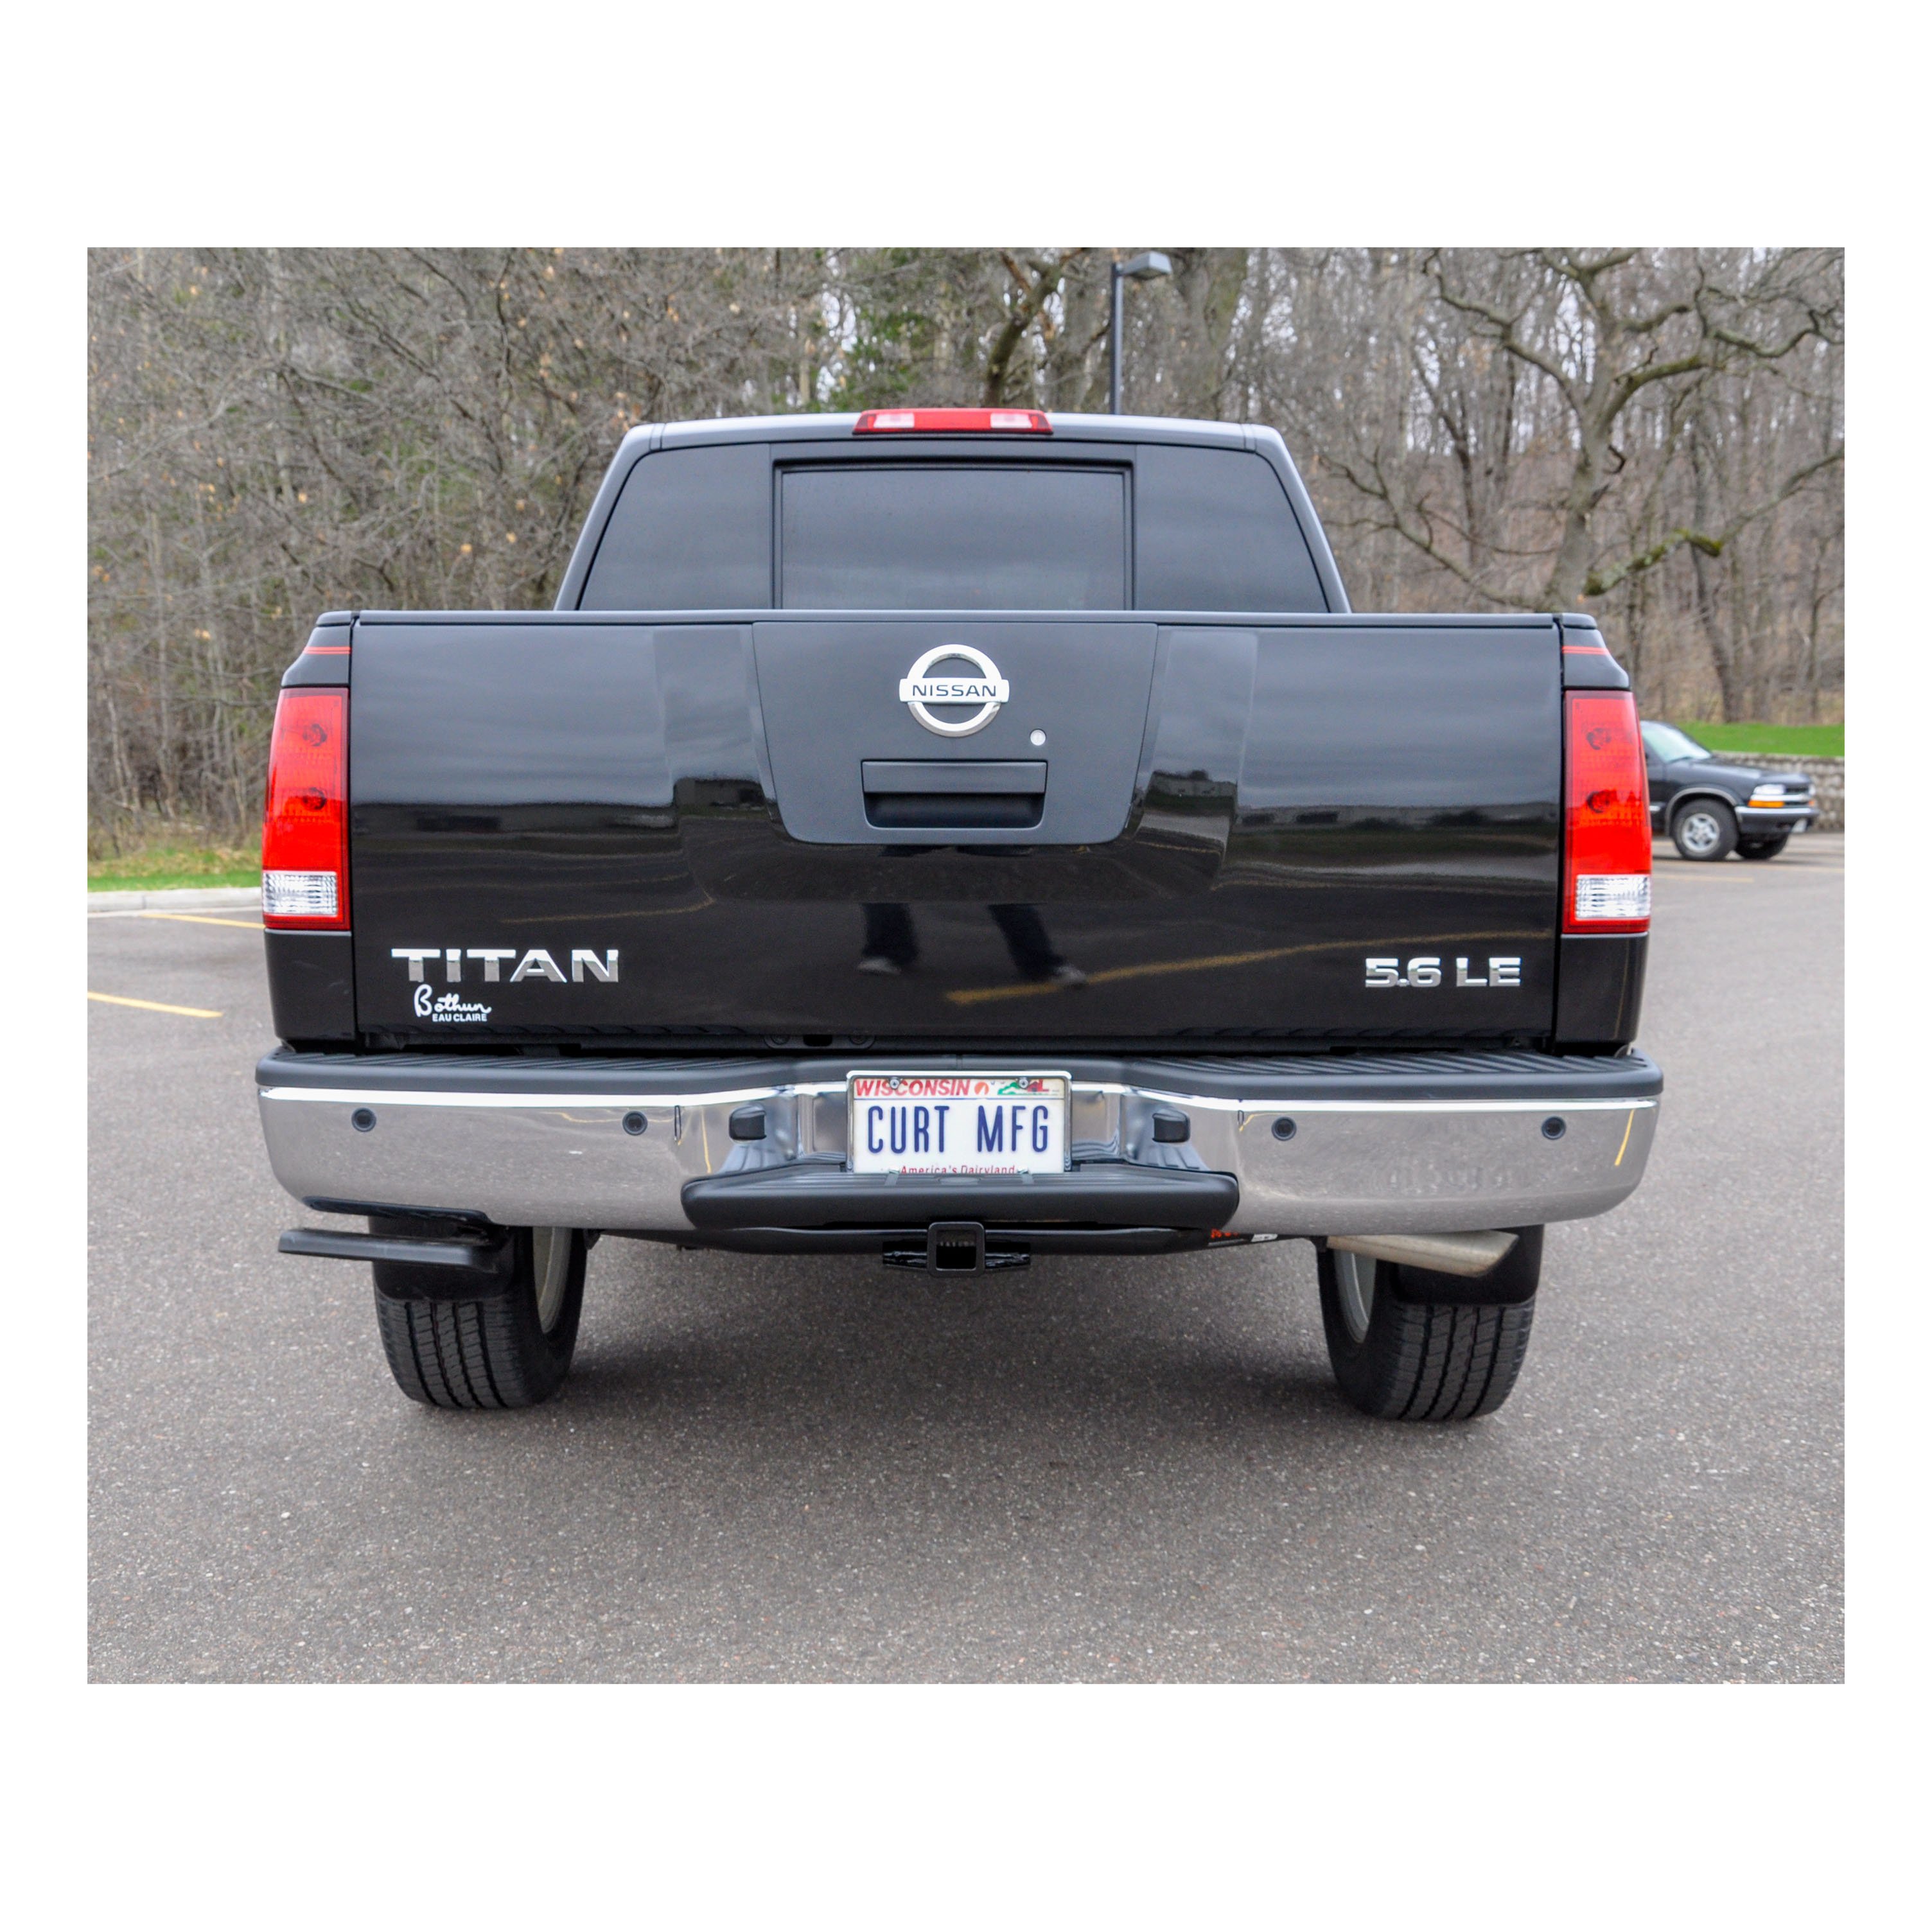 For 2004-2015 Nissan TITAN Tow Package Camp n' Field Trailer Hitch + Brake Controller Curt Assure 51160 Proportional Up To 4 Axles + 7 Way Trailer Wiring Plug & 2-5/16" ball 4 inch drop Fits Models w/ Existing USCAR 7-way Curt 13199 2 inch Tow Re